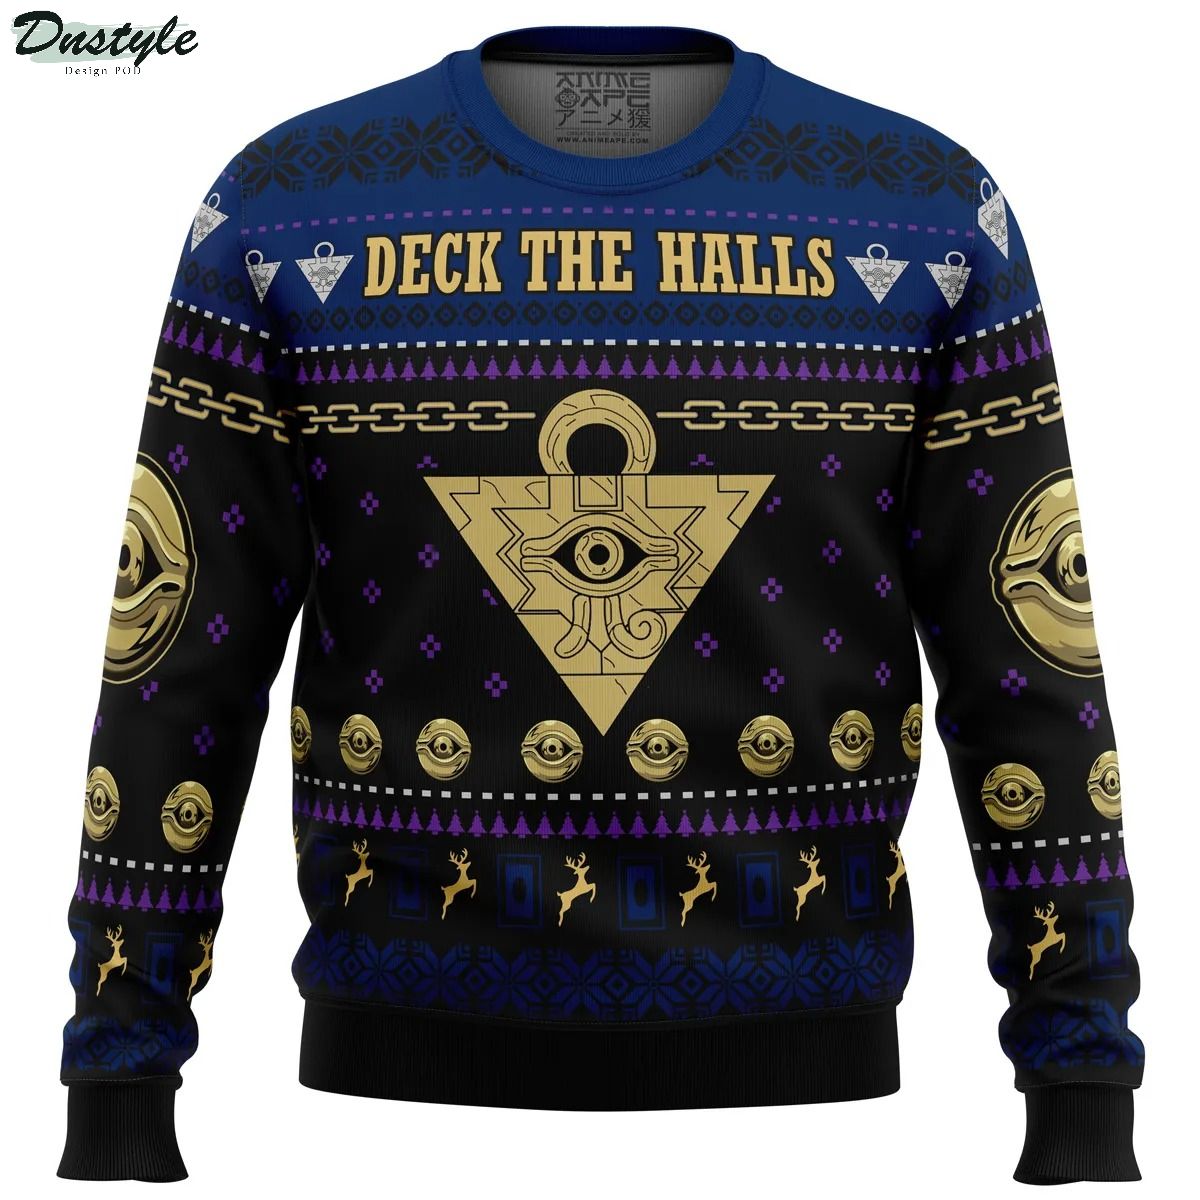 Yugioh Deck the Halls Ugly Christmas Sweater